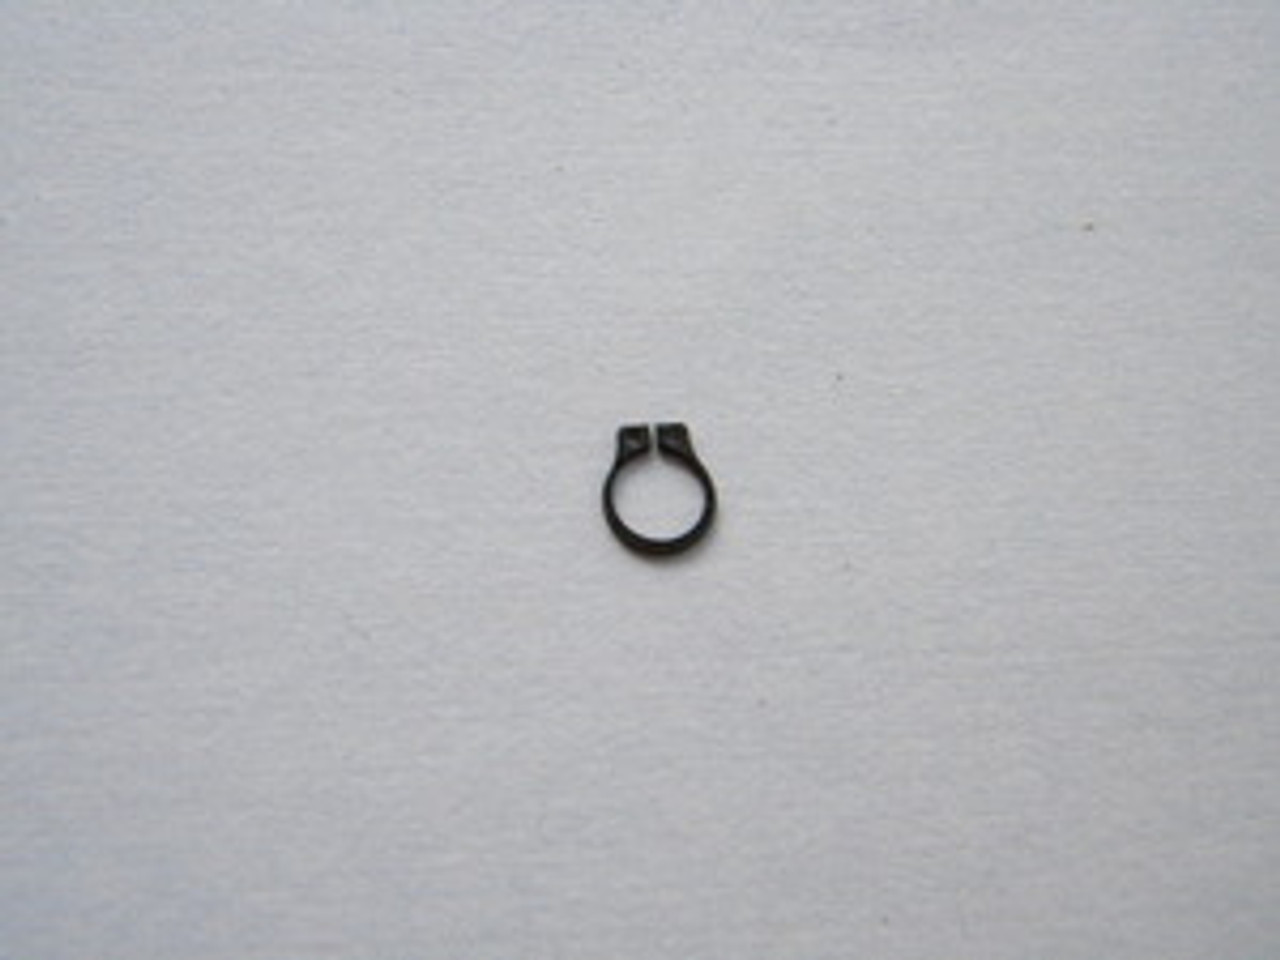 Elliptical Small Snap Ring Part Number 243375